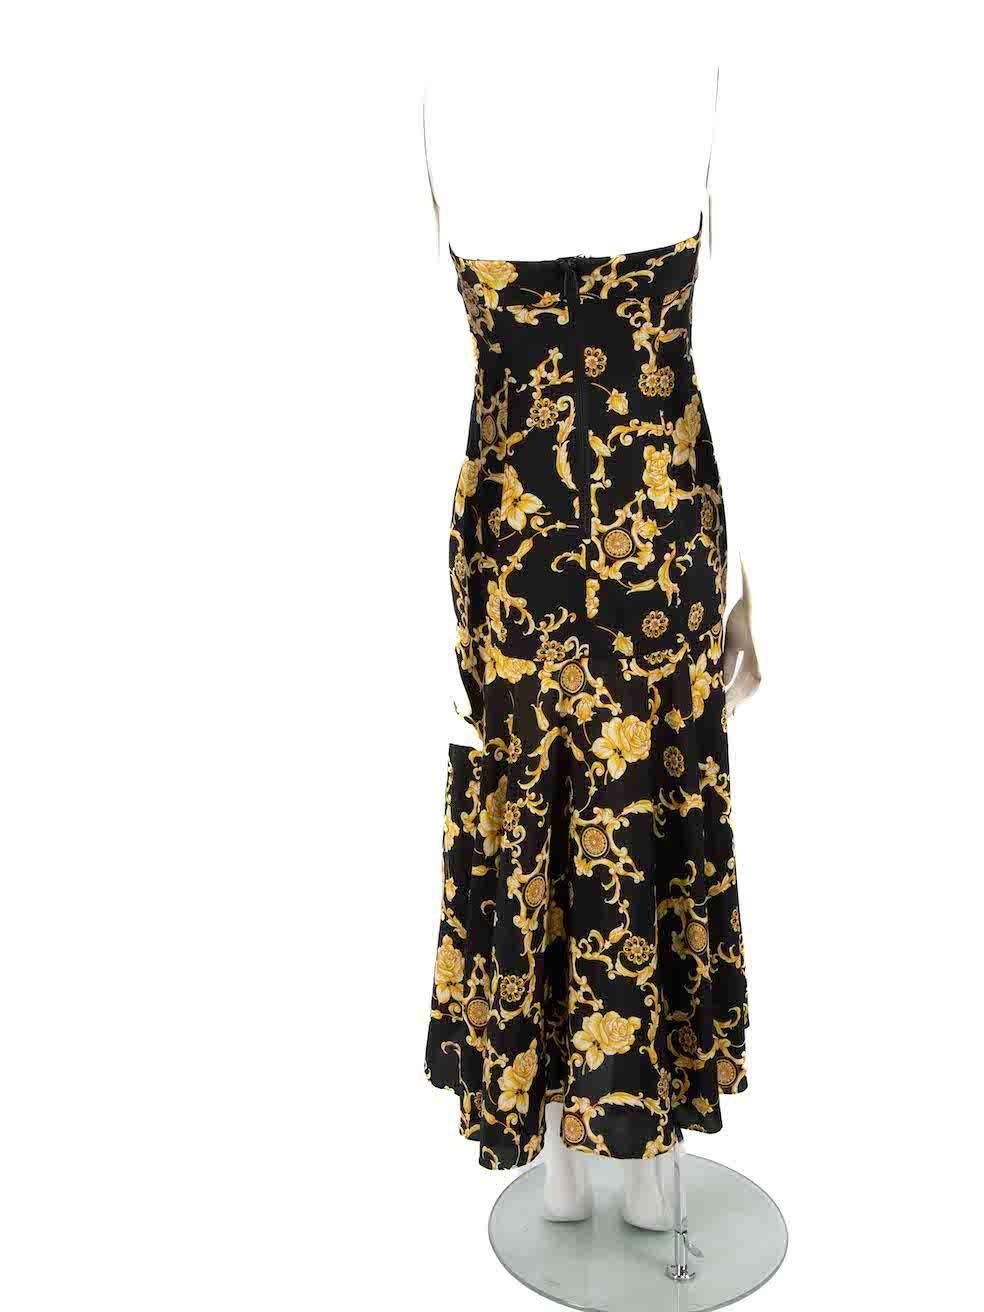 Veronica Beard Black & Yellow Silk Strapless Dress Size XS In Good Condition For Sale In London, GB